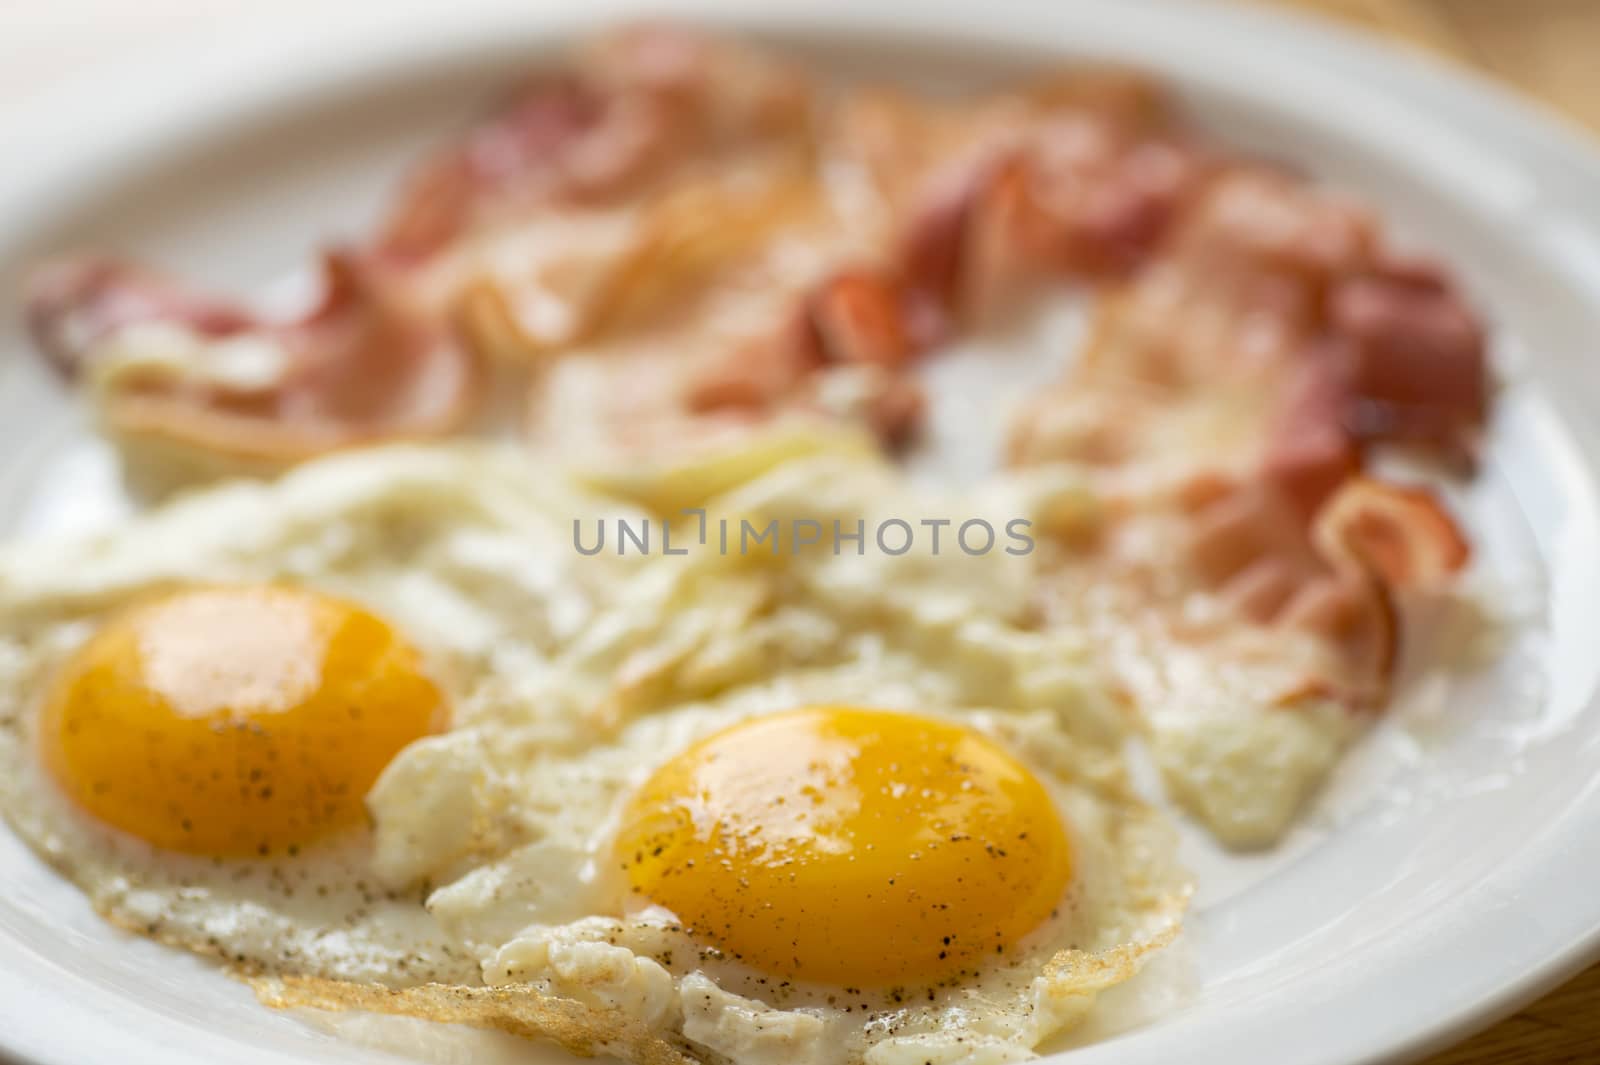 Two fried eggs and bacon on the plate